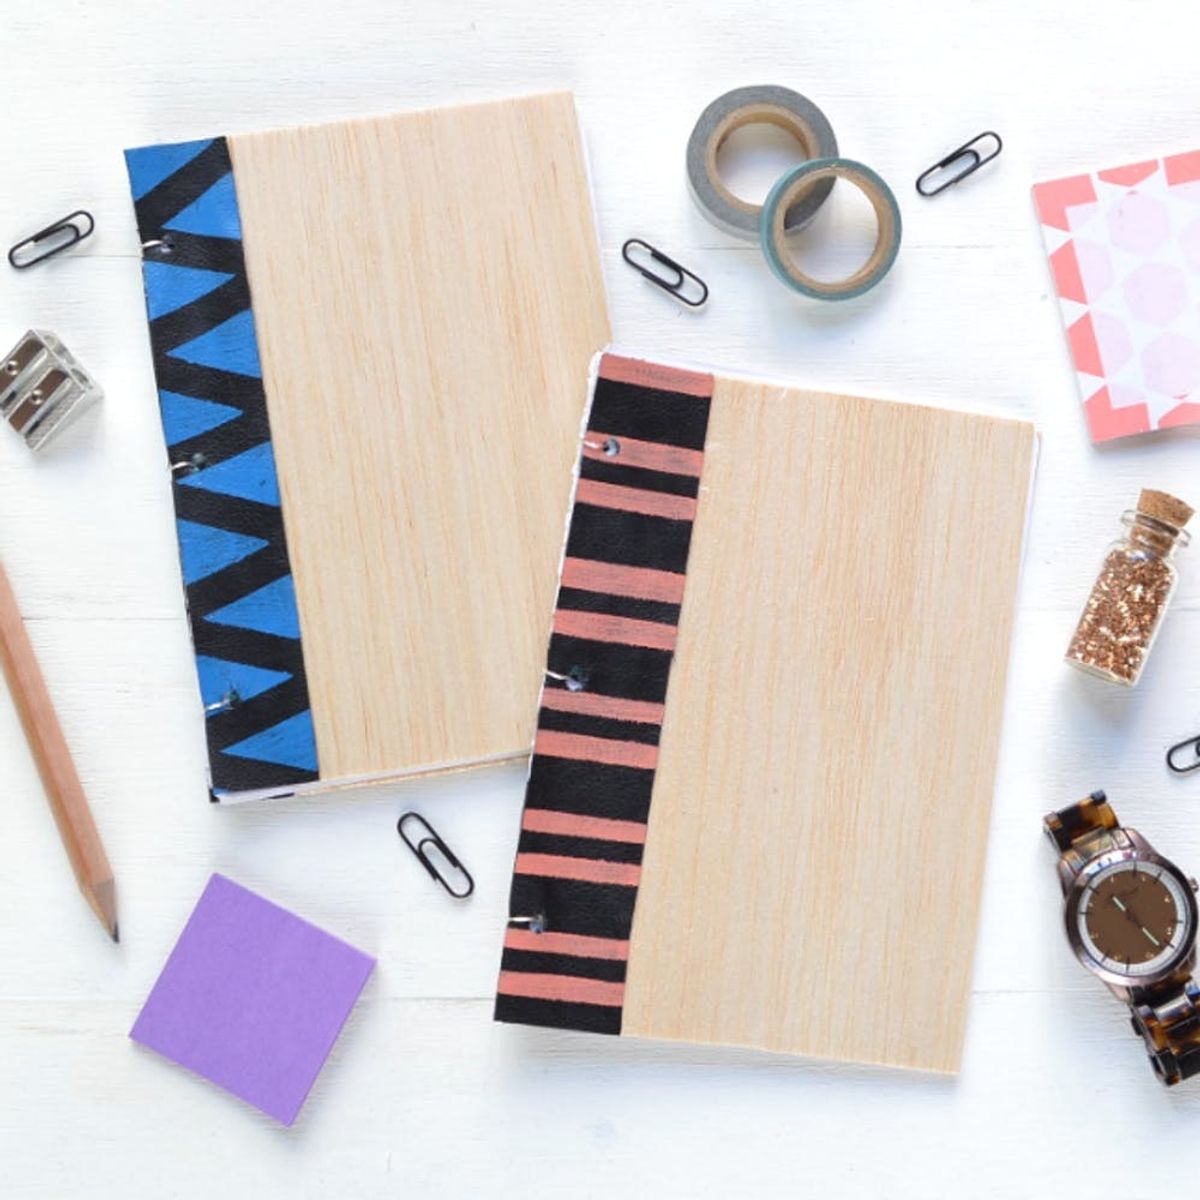 Make an Effortlessly Adorable Notebook With Wood and Leather